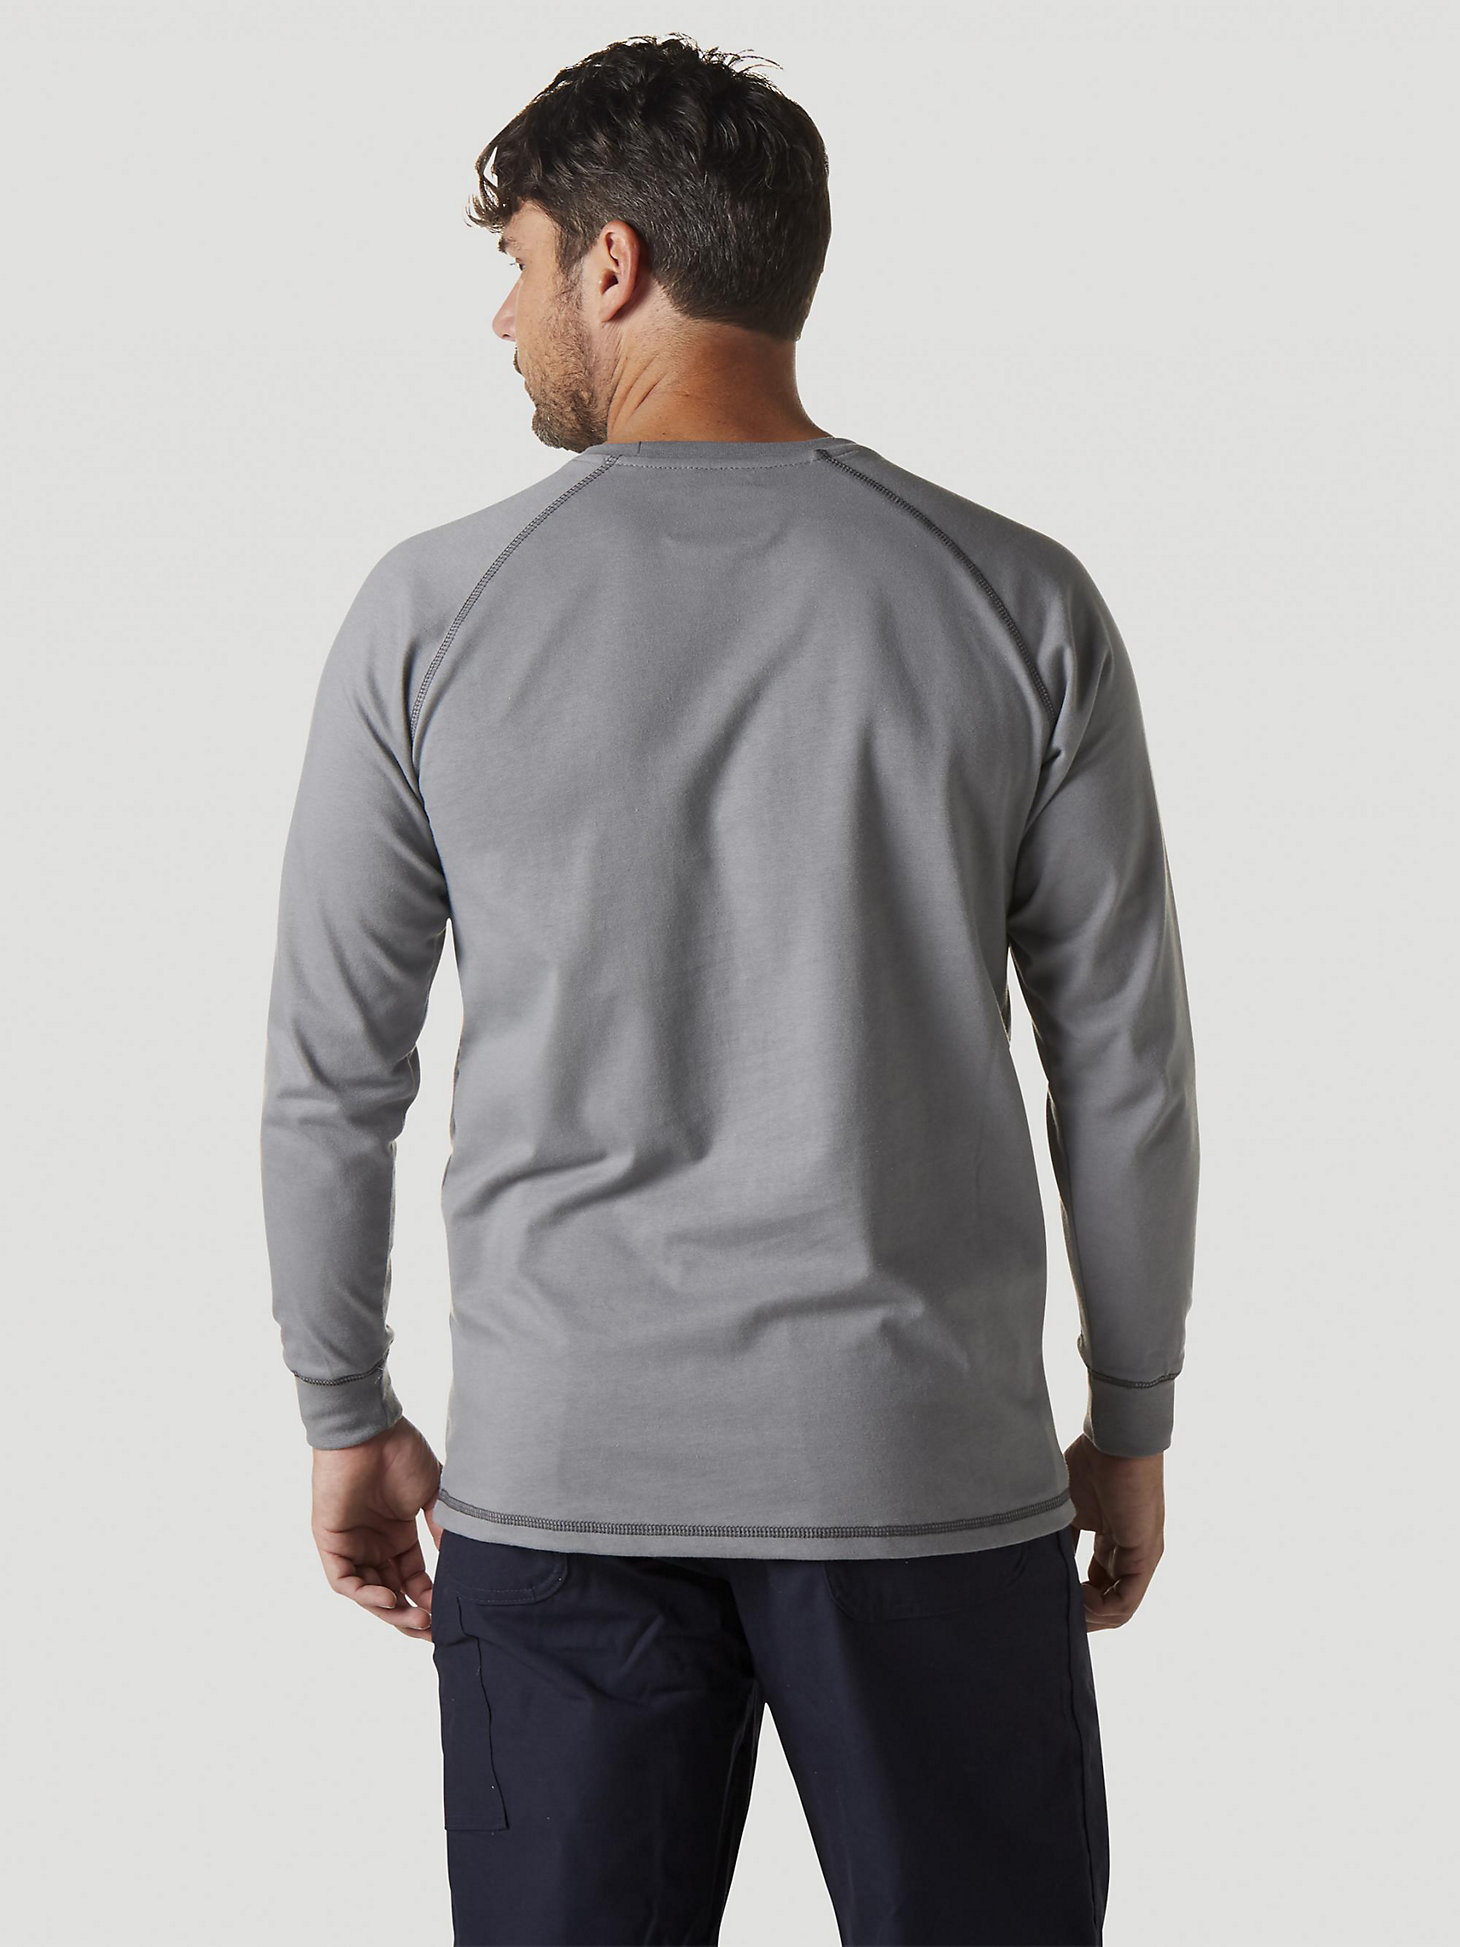 Wrangler® FR Flame Resistant Long Sleeve Base Layer T-Shirt in Silver alternative view 1